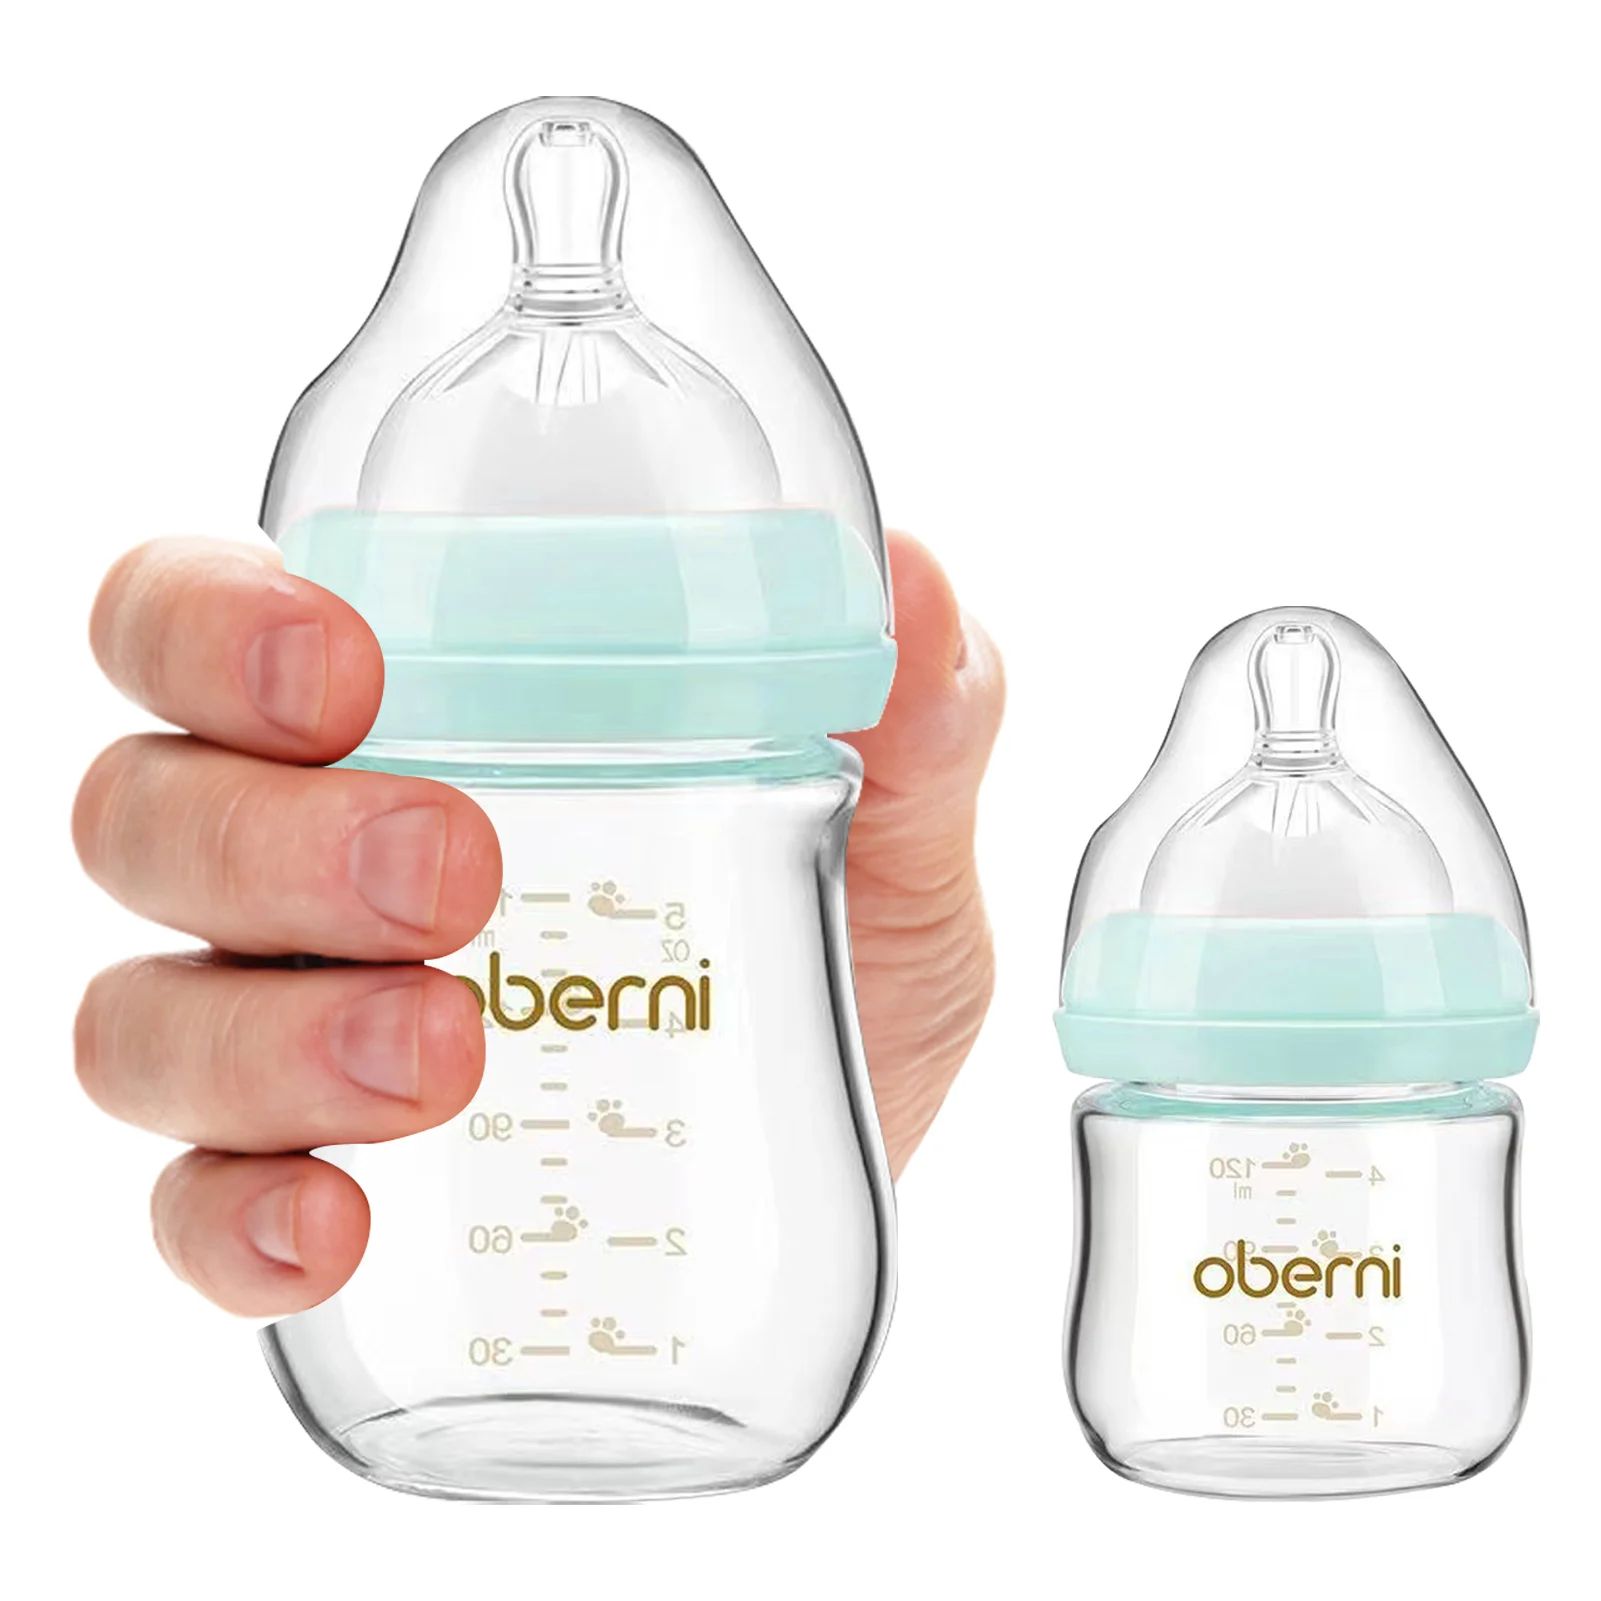 

Oberni Natural Feel Baby Bottle Closer To Nature Baby Bottles Slow Flow Breast-Like Nipple With Anti-Colic Valve Blue/Green/Pink